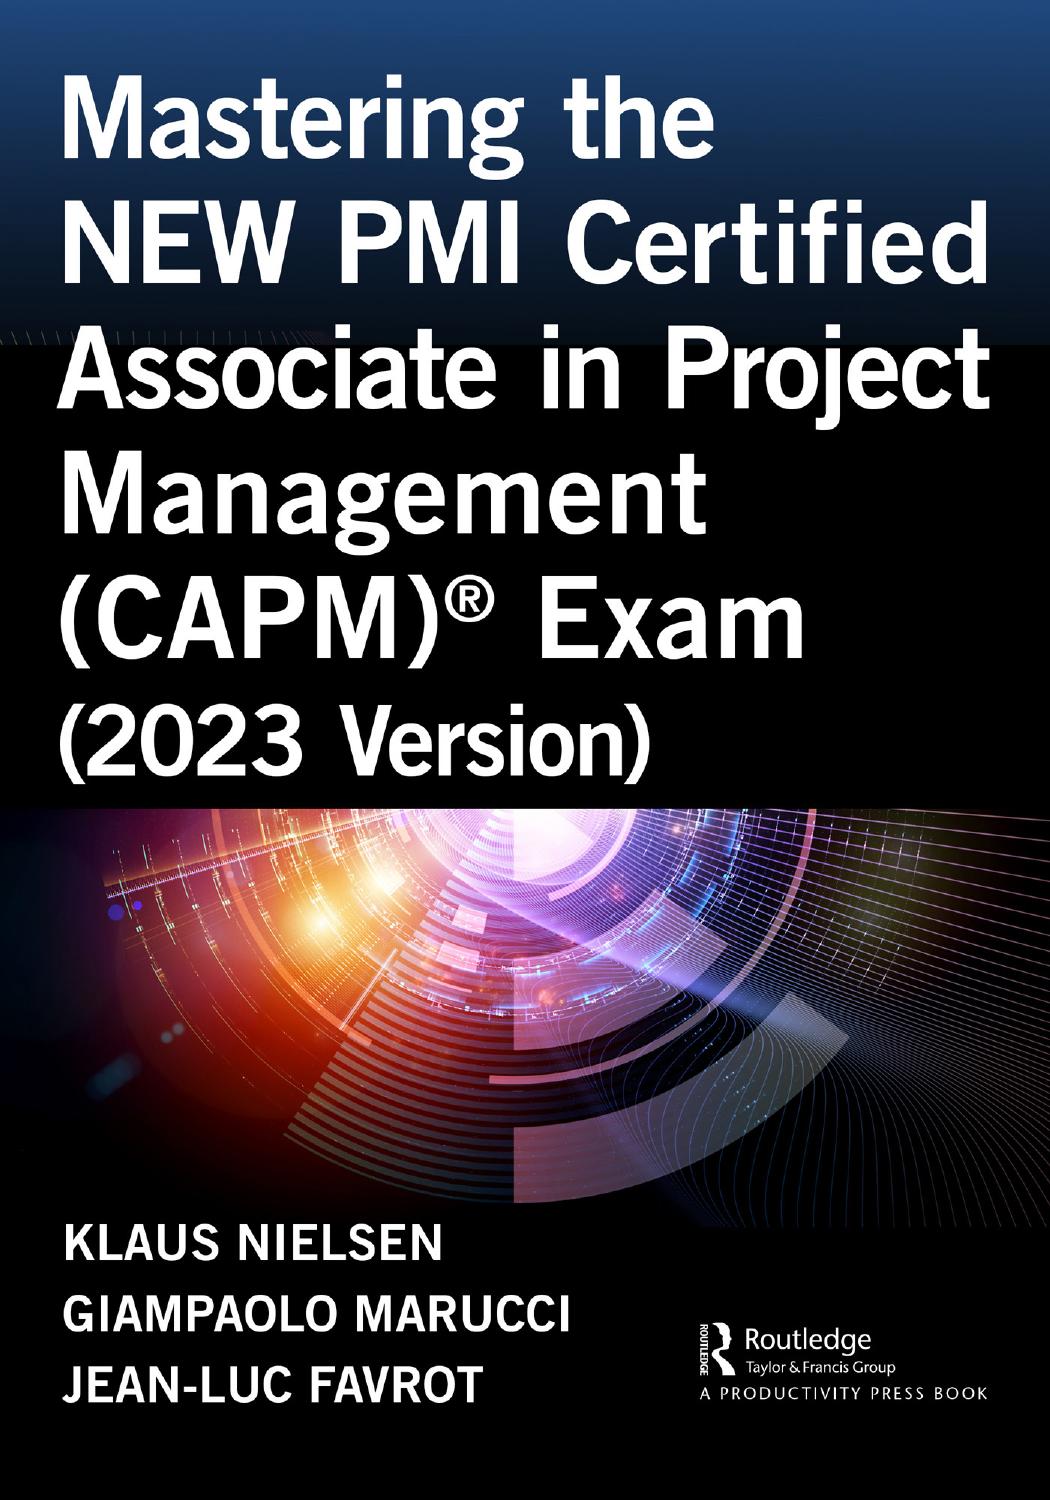 Mastering the NEW PMI Certified Associate in Project Management (CAPM®) Exam (2023 Version)